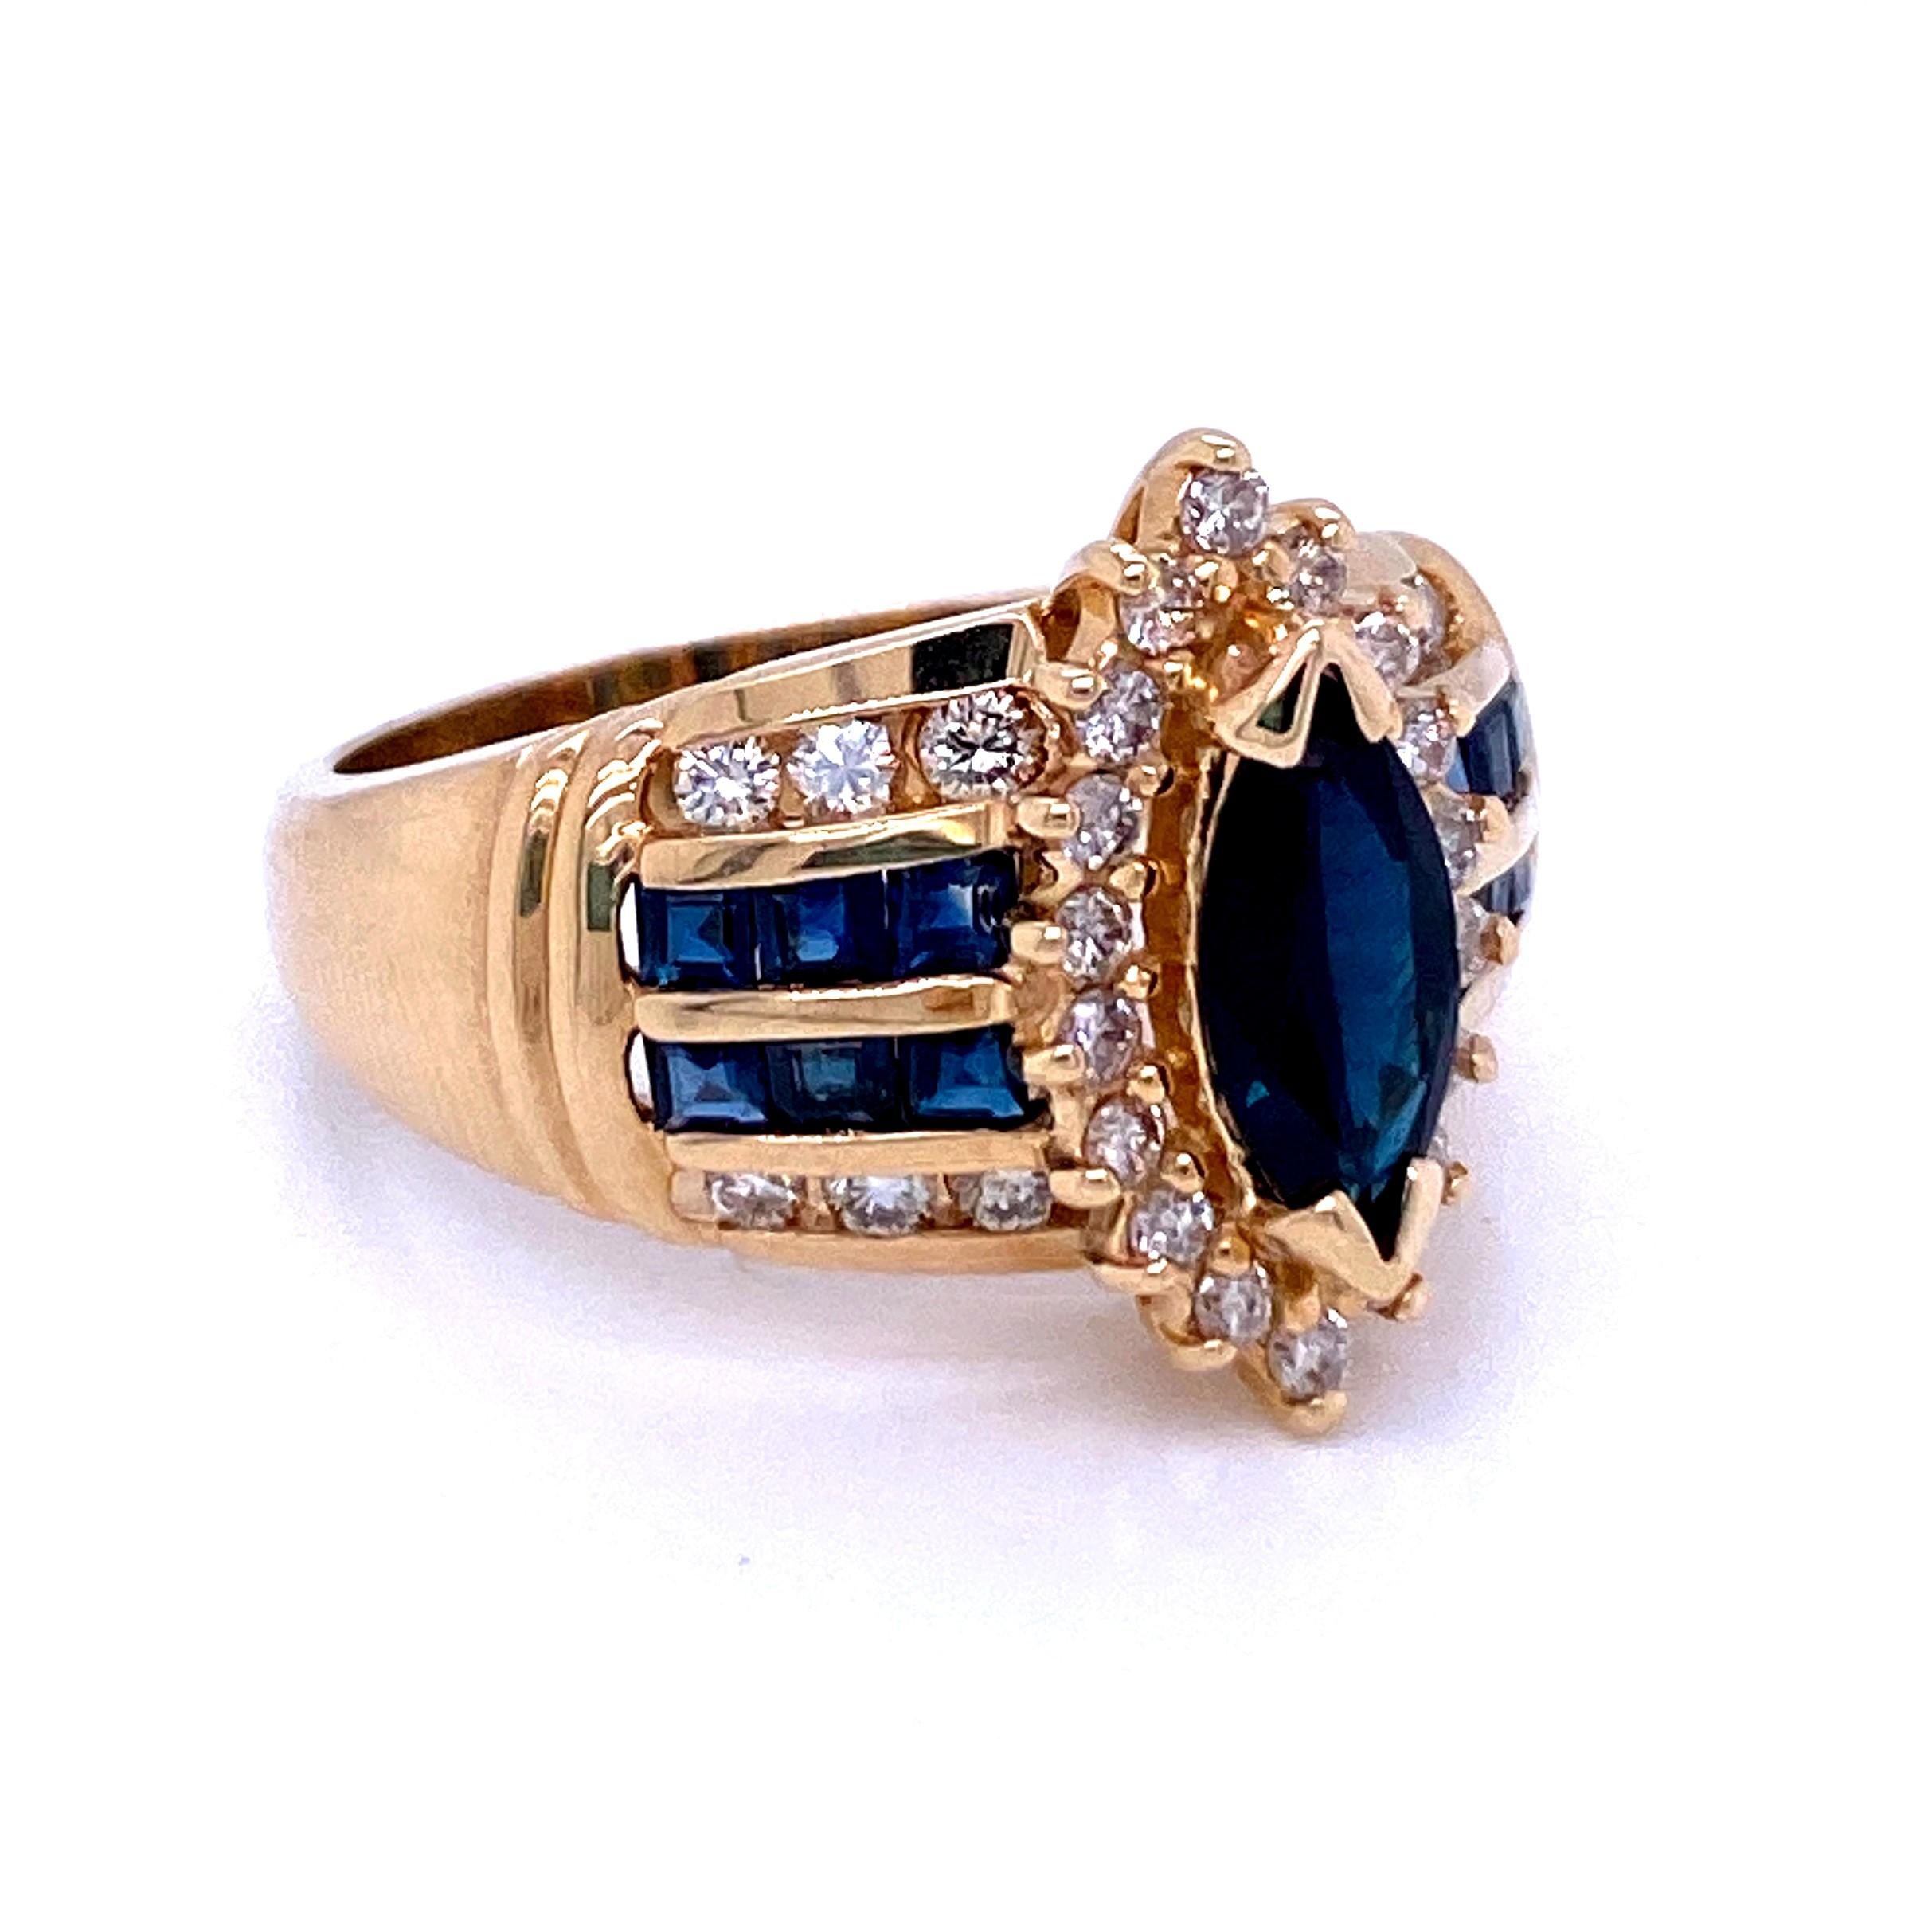 One 14 karat yellow gold Marquise cut natural blue sapphire, approximately 1.00 carat surrounded by a halo of eighteen 1.6mm light brown diamonds approximately 0.30 carat total weight  with SI1 clarity.  The halo sits above twelve 2mm square